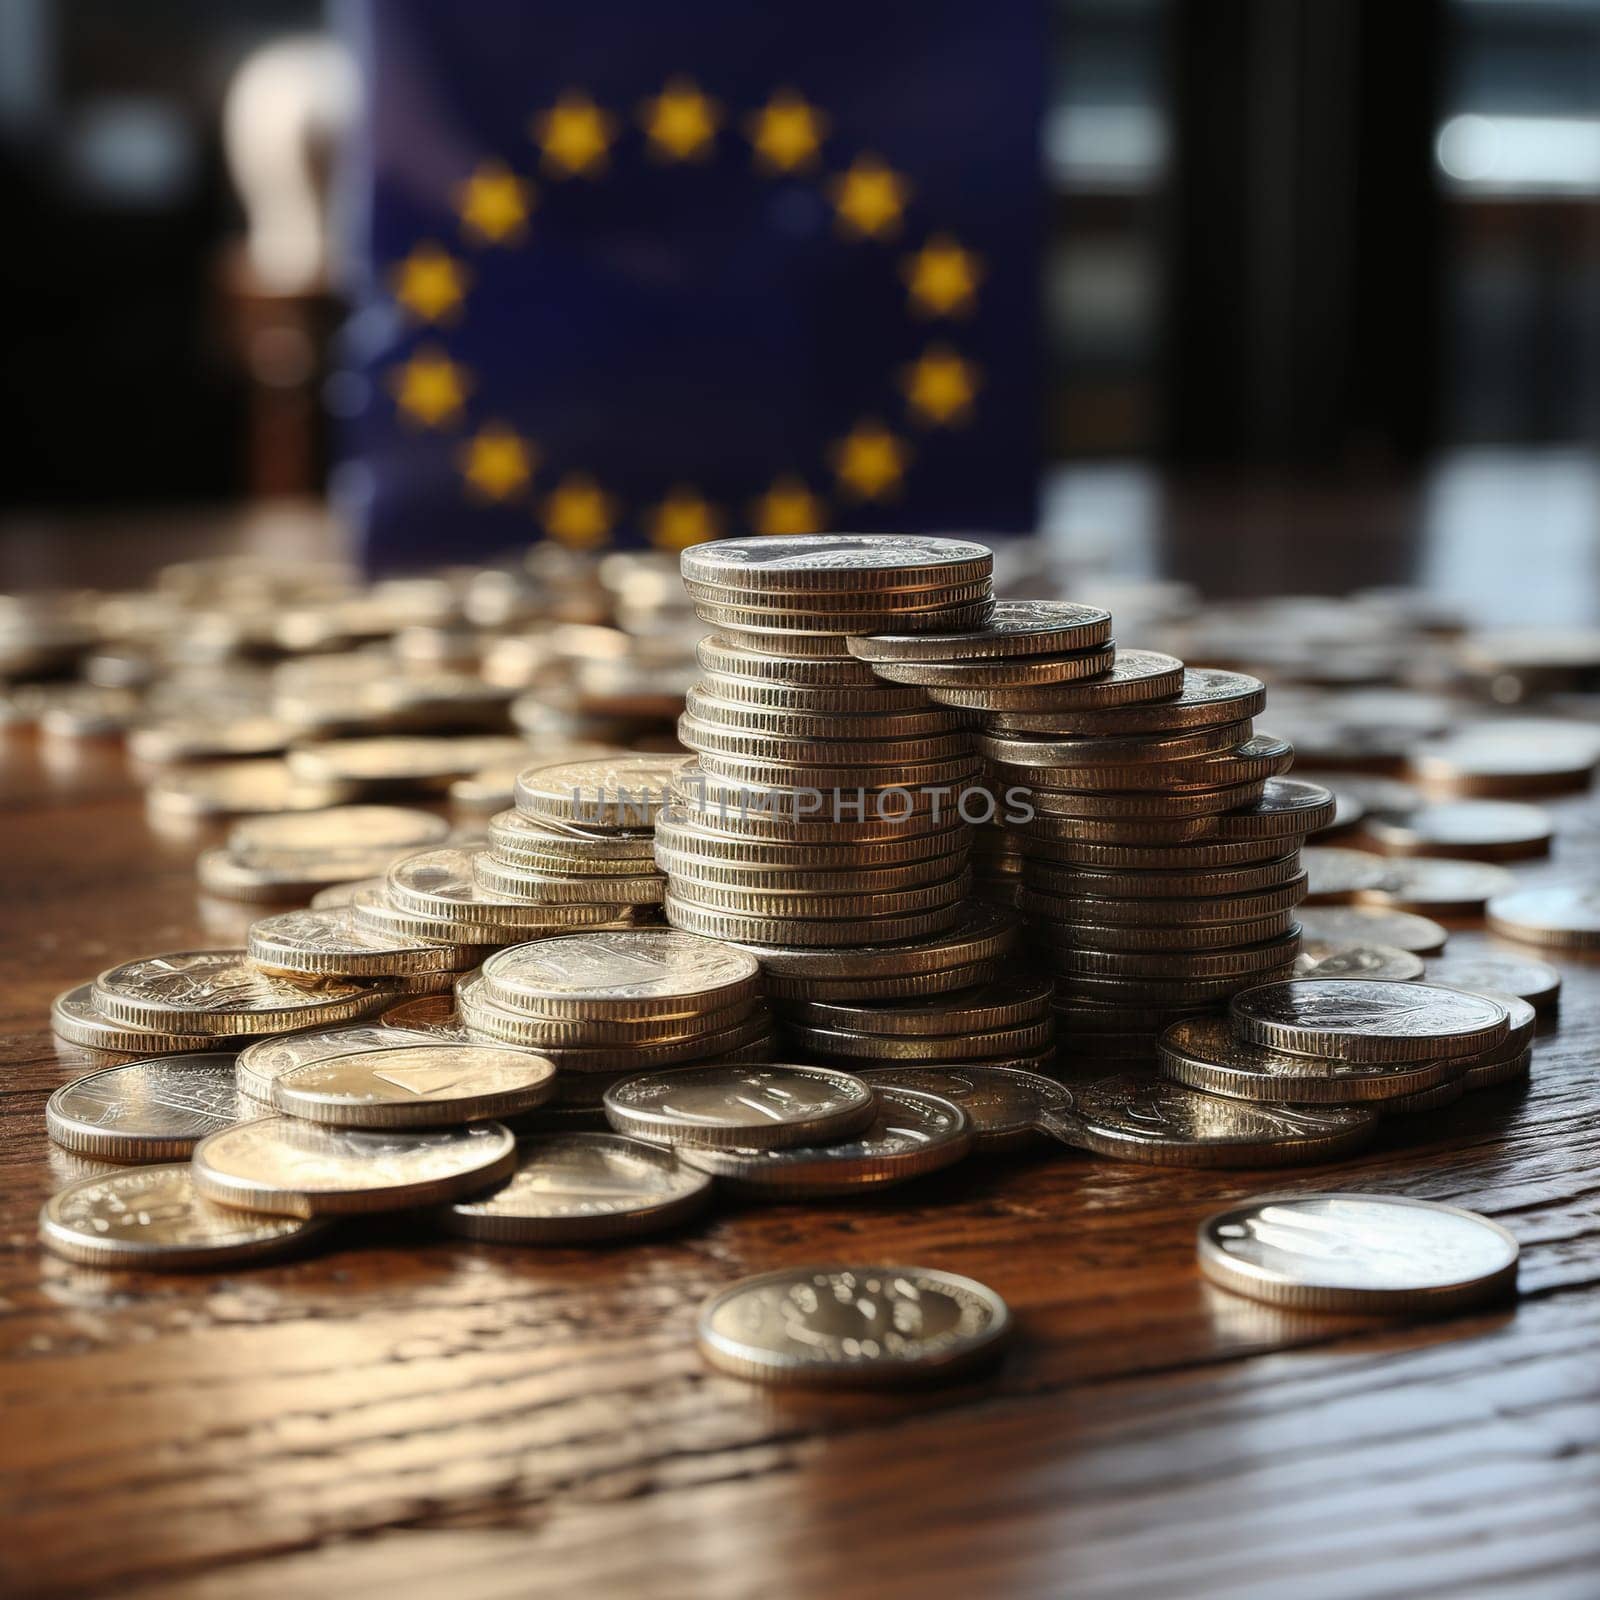 Stacks of coins on a wooden surface against the background of a blurred EU flag. Generated by artificial intelligence by Vovmar